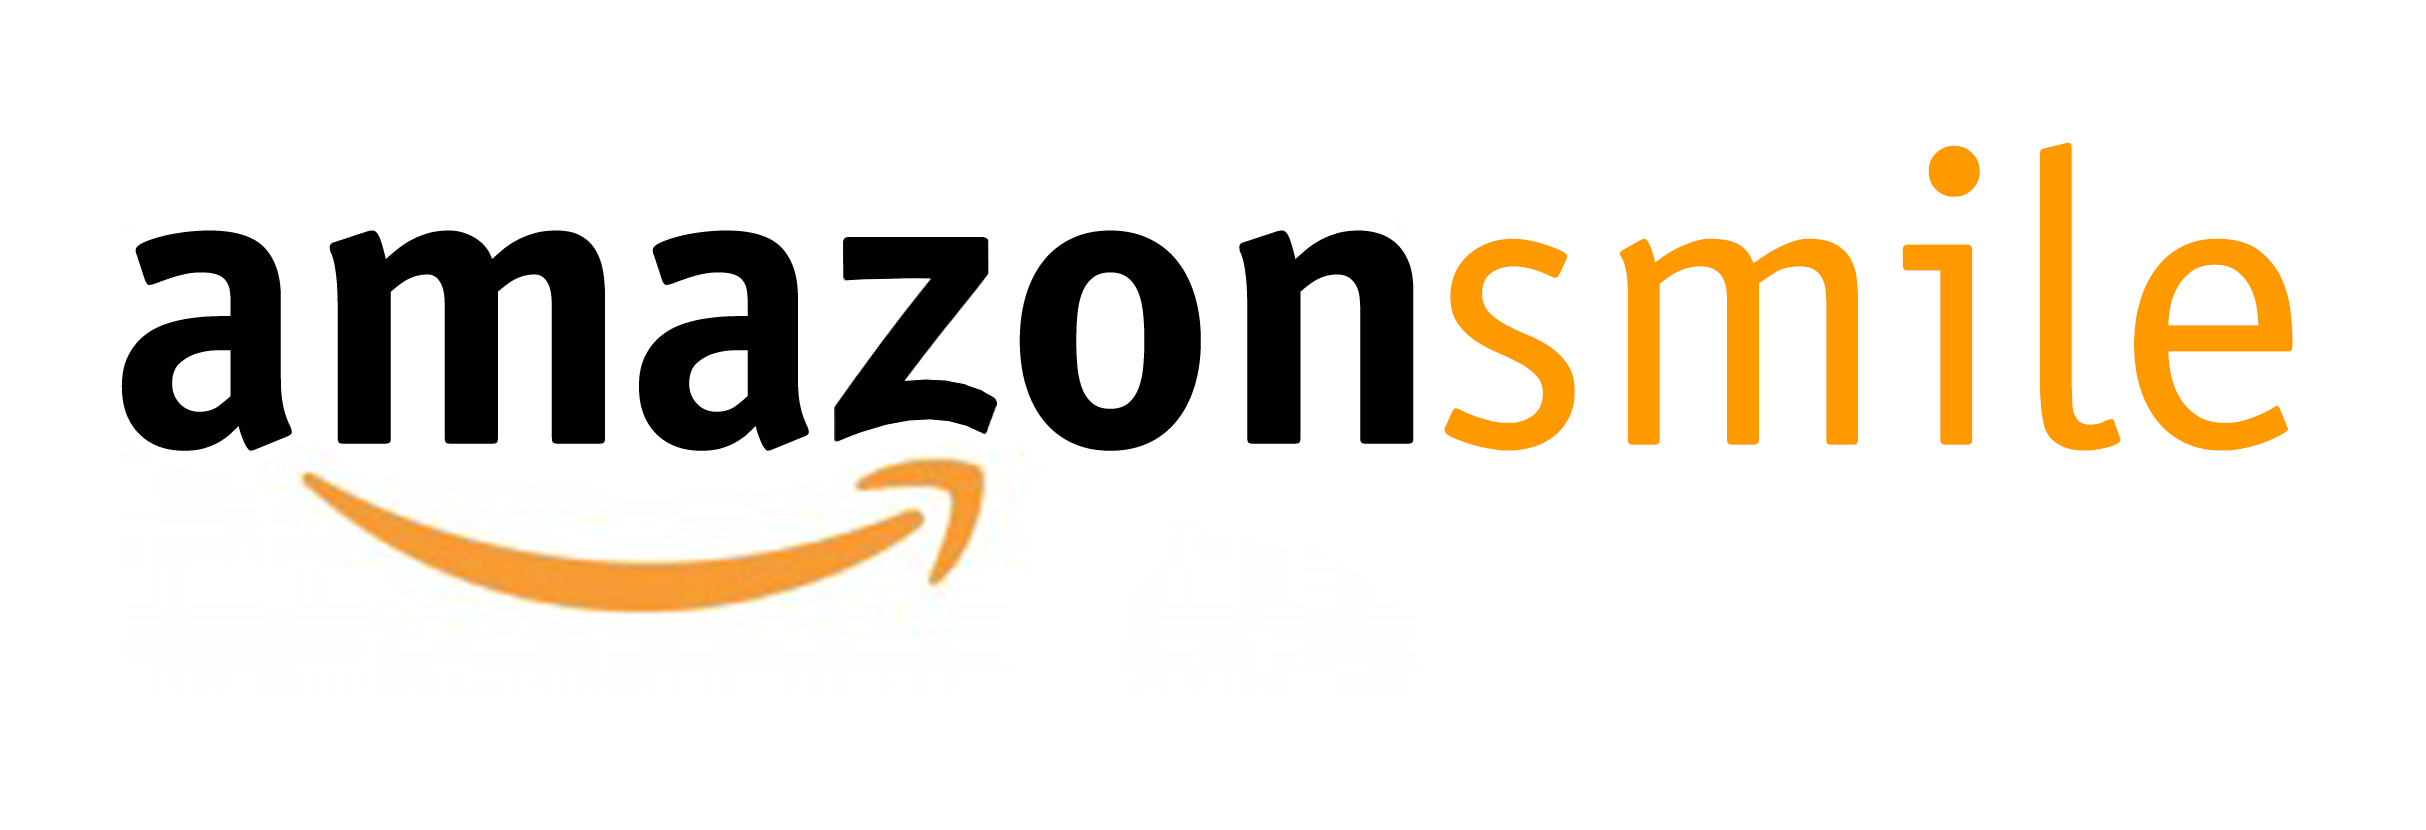 Click on amazonsmile to help support KASL by shopping at Amazon